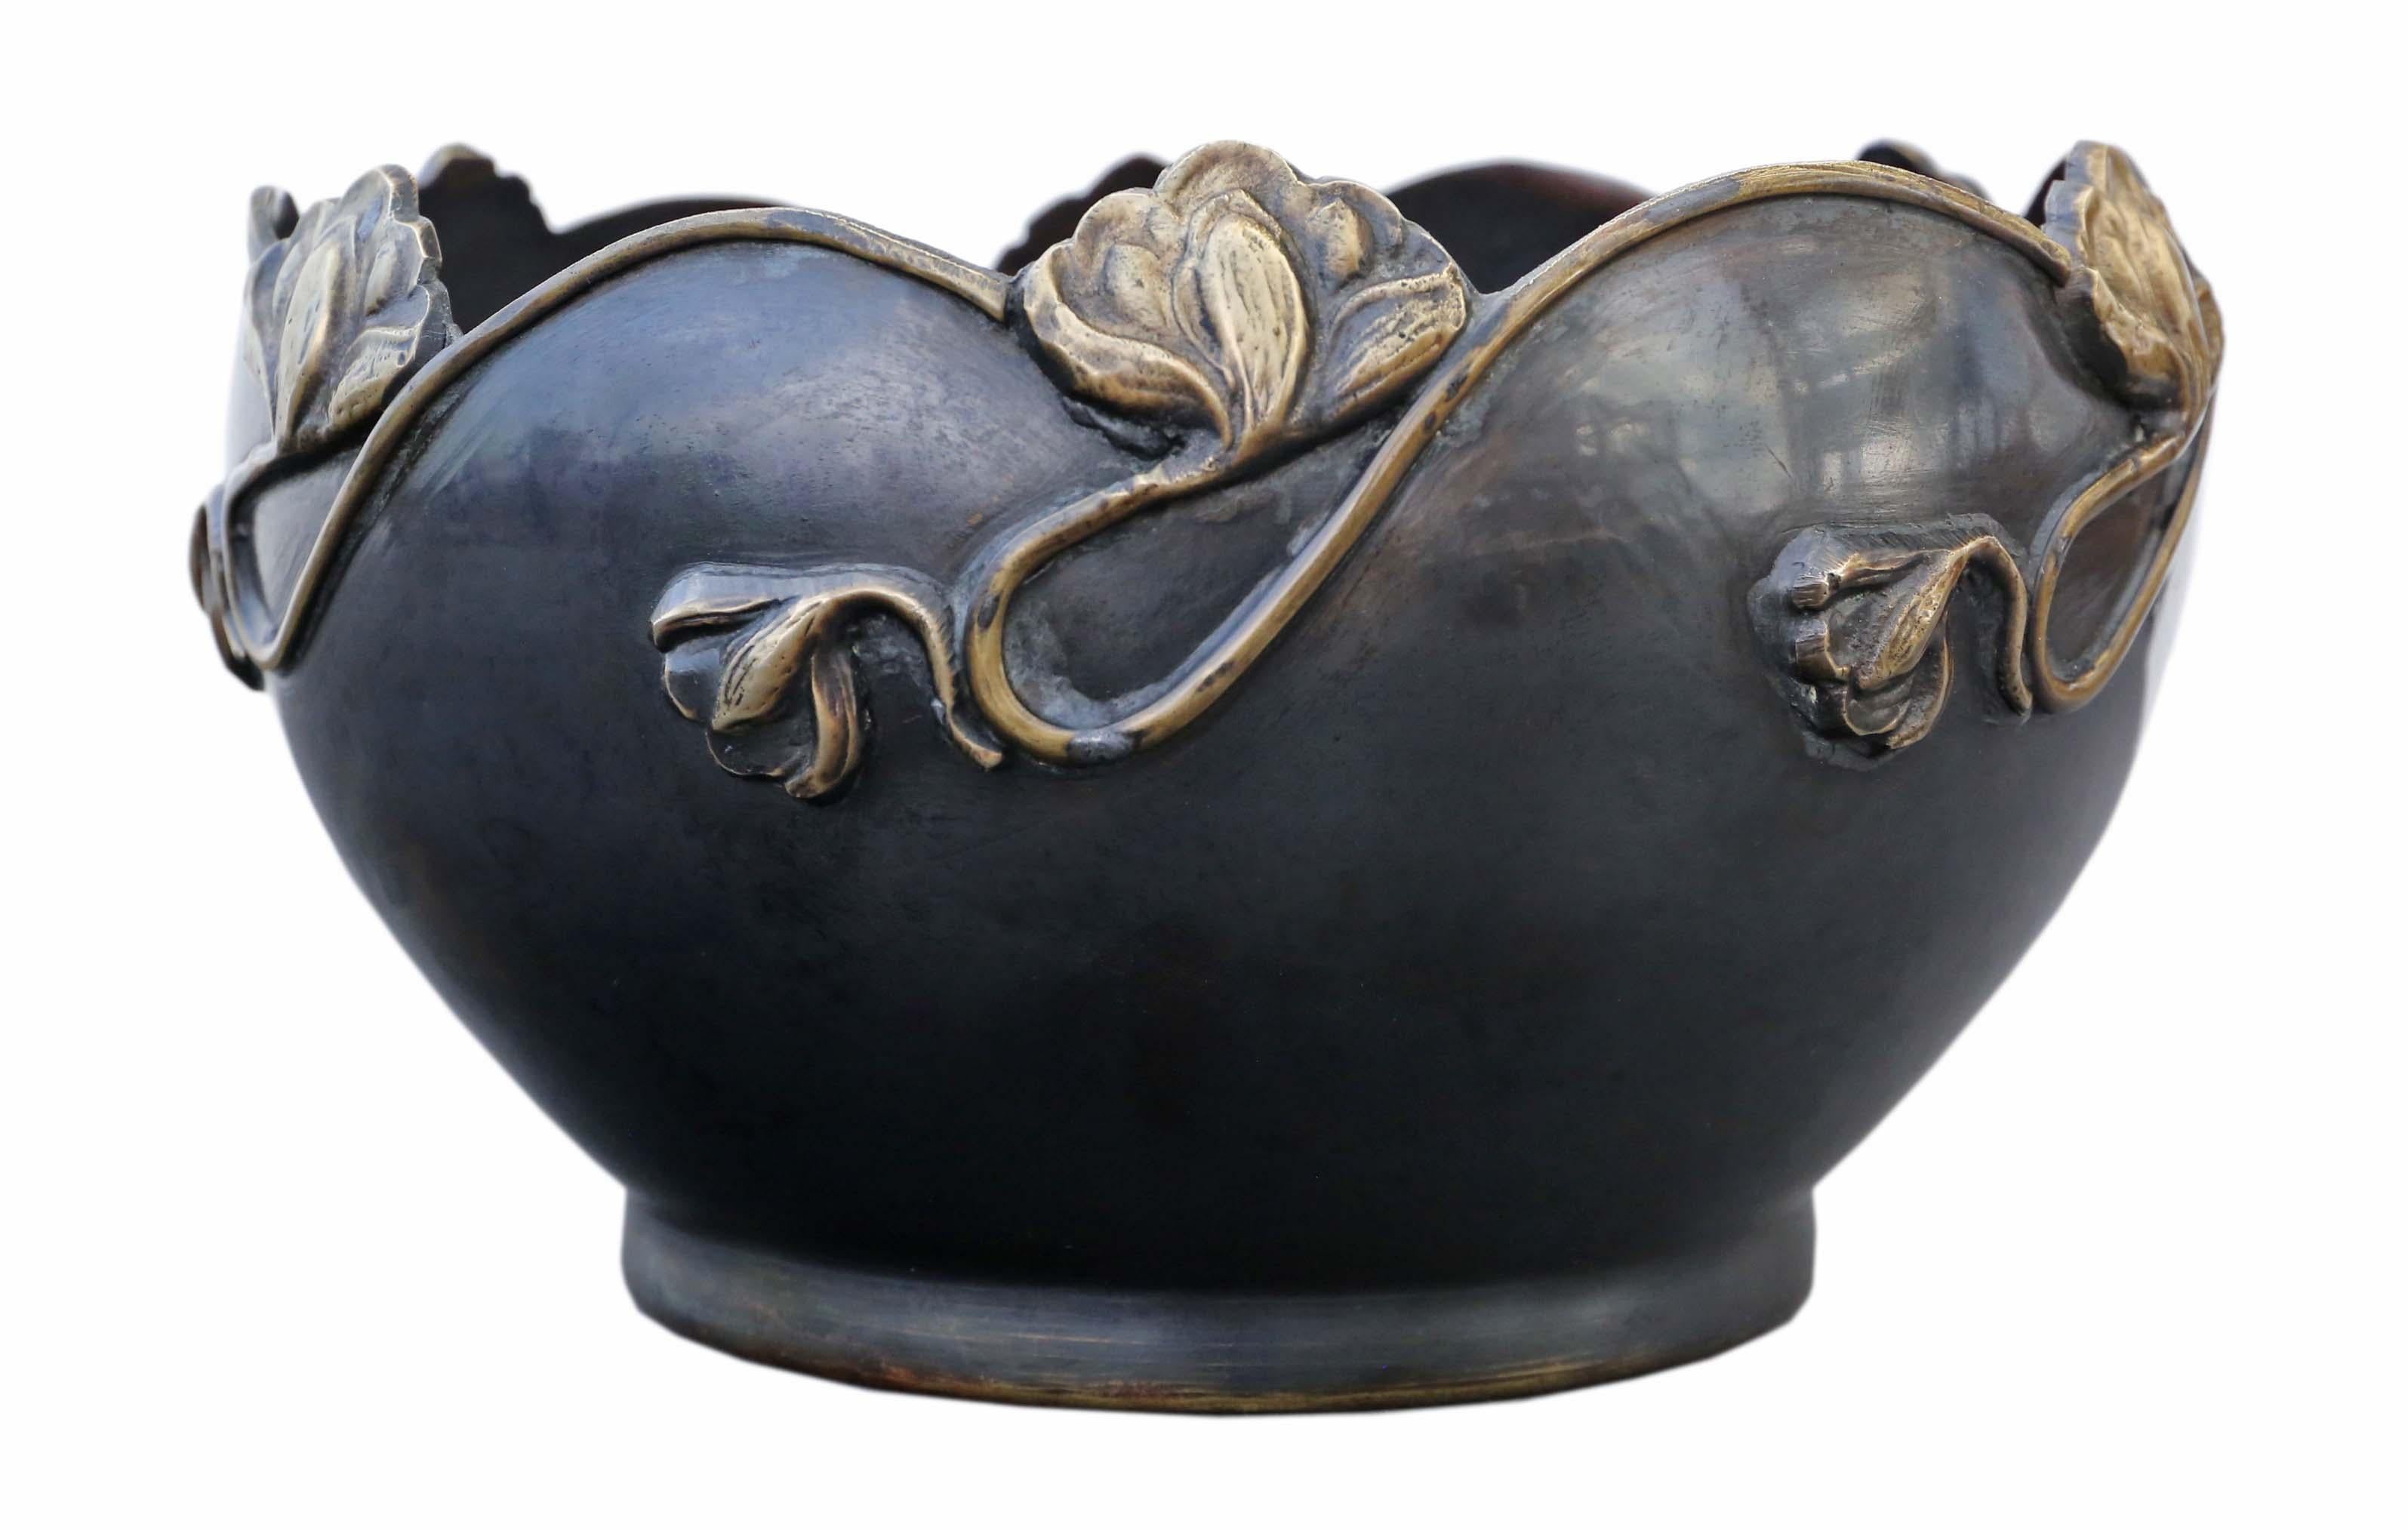 Antique large quality Art Nouveau Jardinière bowl censor planter Japanese Oriental mixed metal Meiji Period early 20th Century.

Would look amazing in the right location and make a fabulous centre piece. Great colour and patina.

Overall maximum